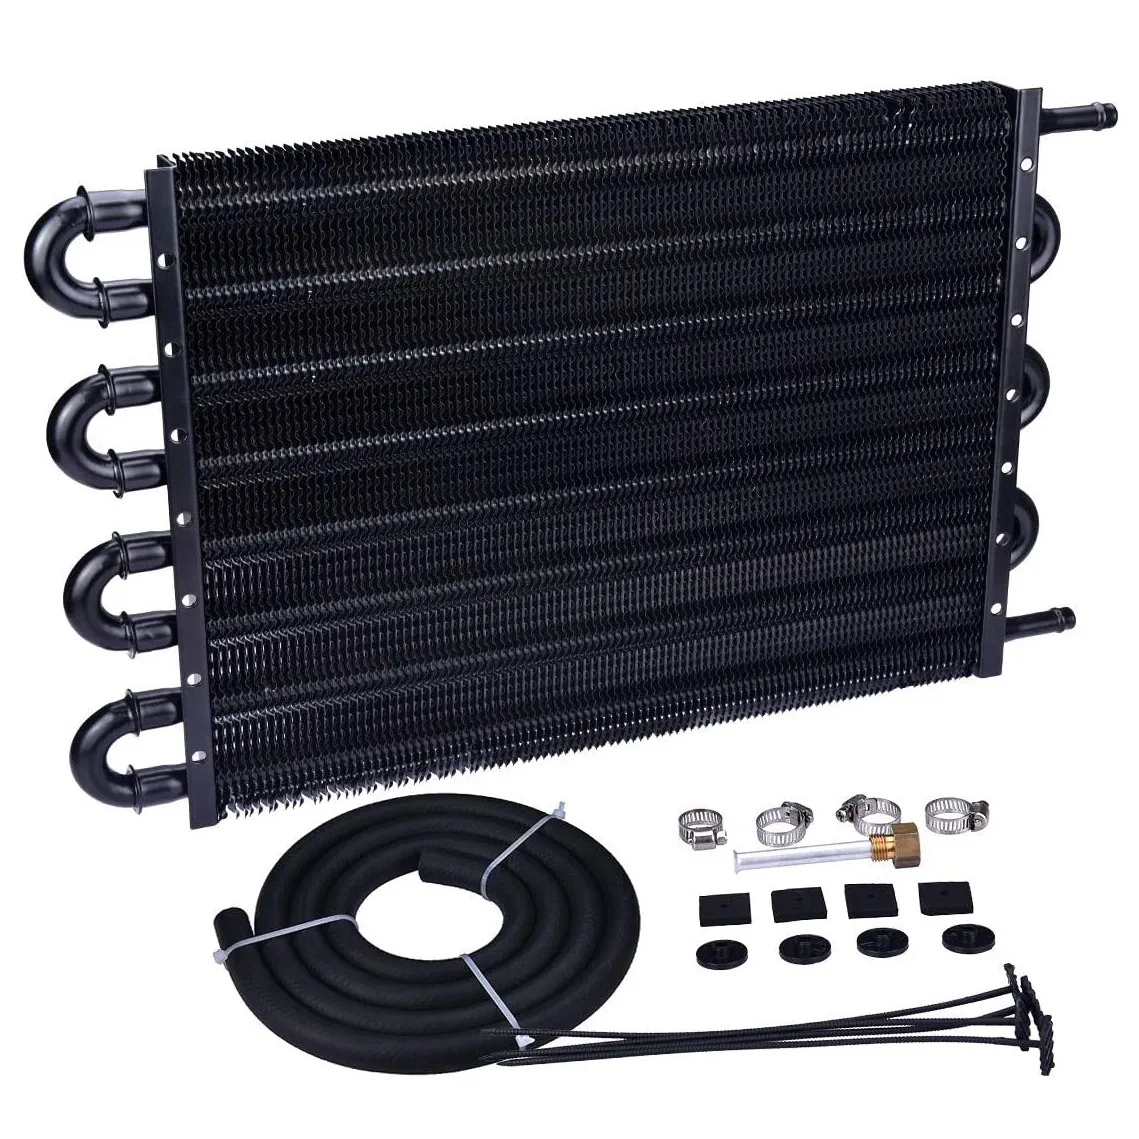 

Car Condenser 8 Pass Tube and Fin Transmission Cooler Air Conditioning Tube Belt Condenser Universal 5/16Inch Oil Cooler